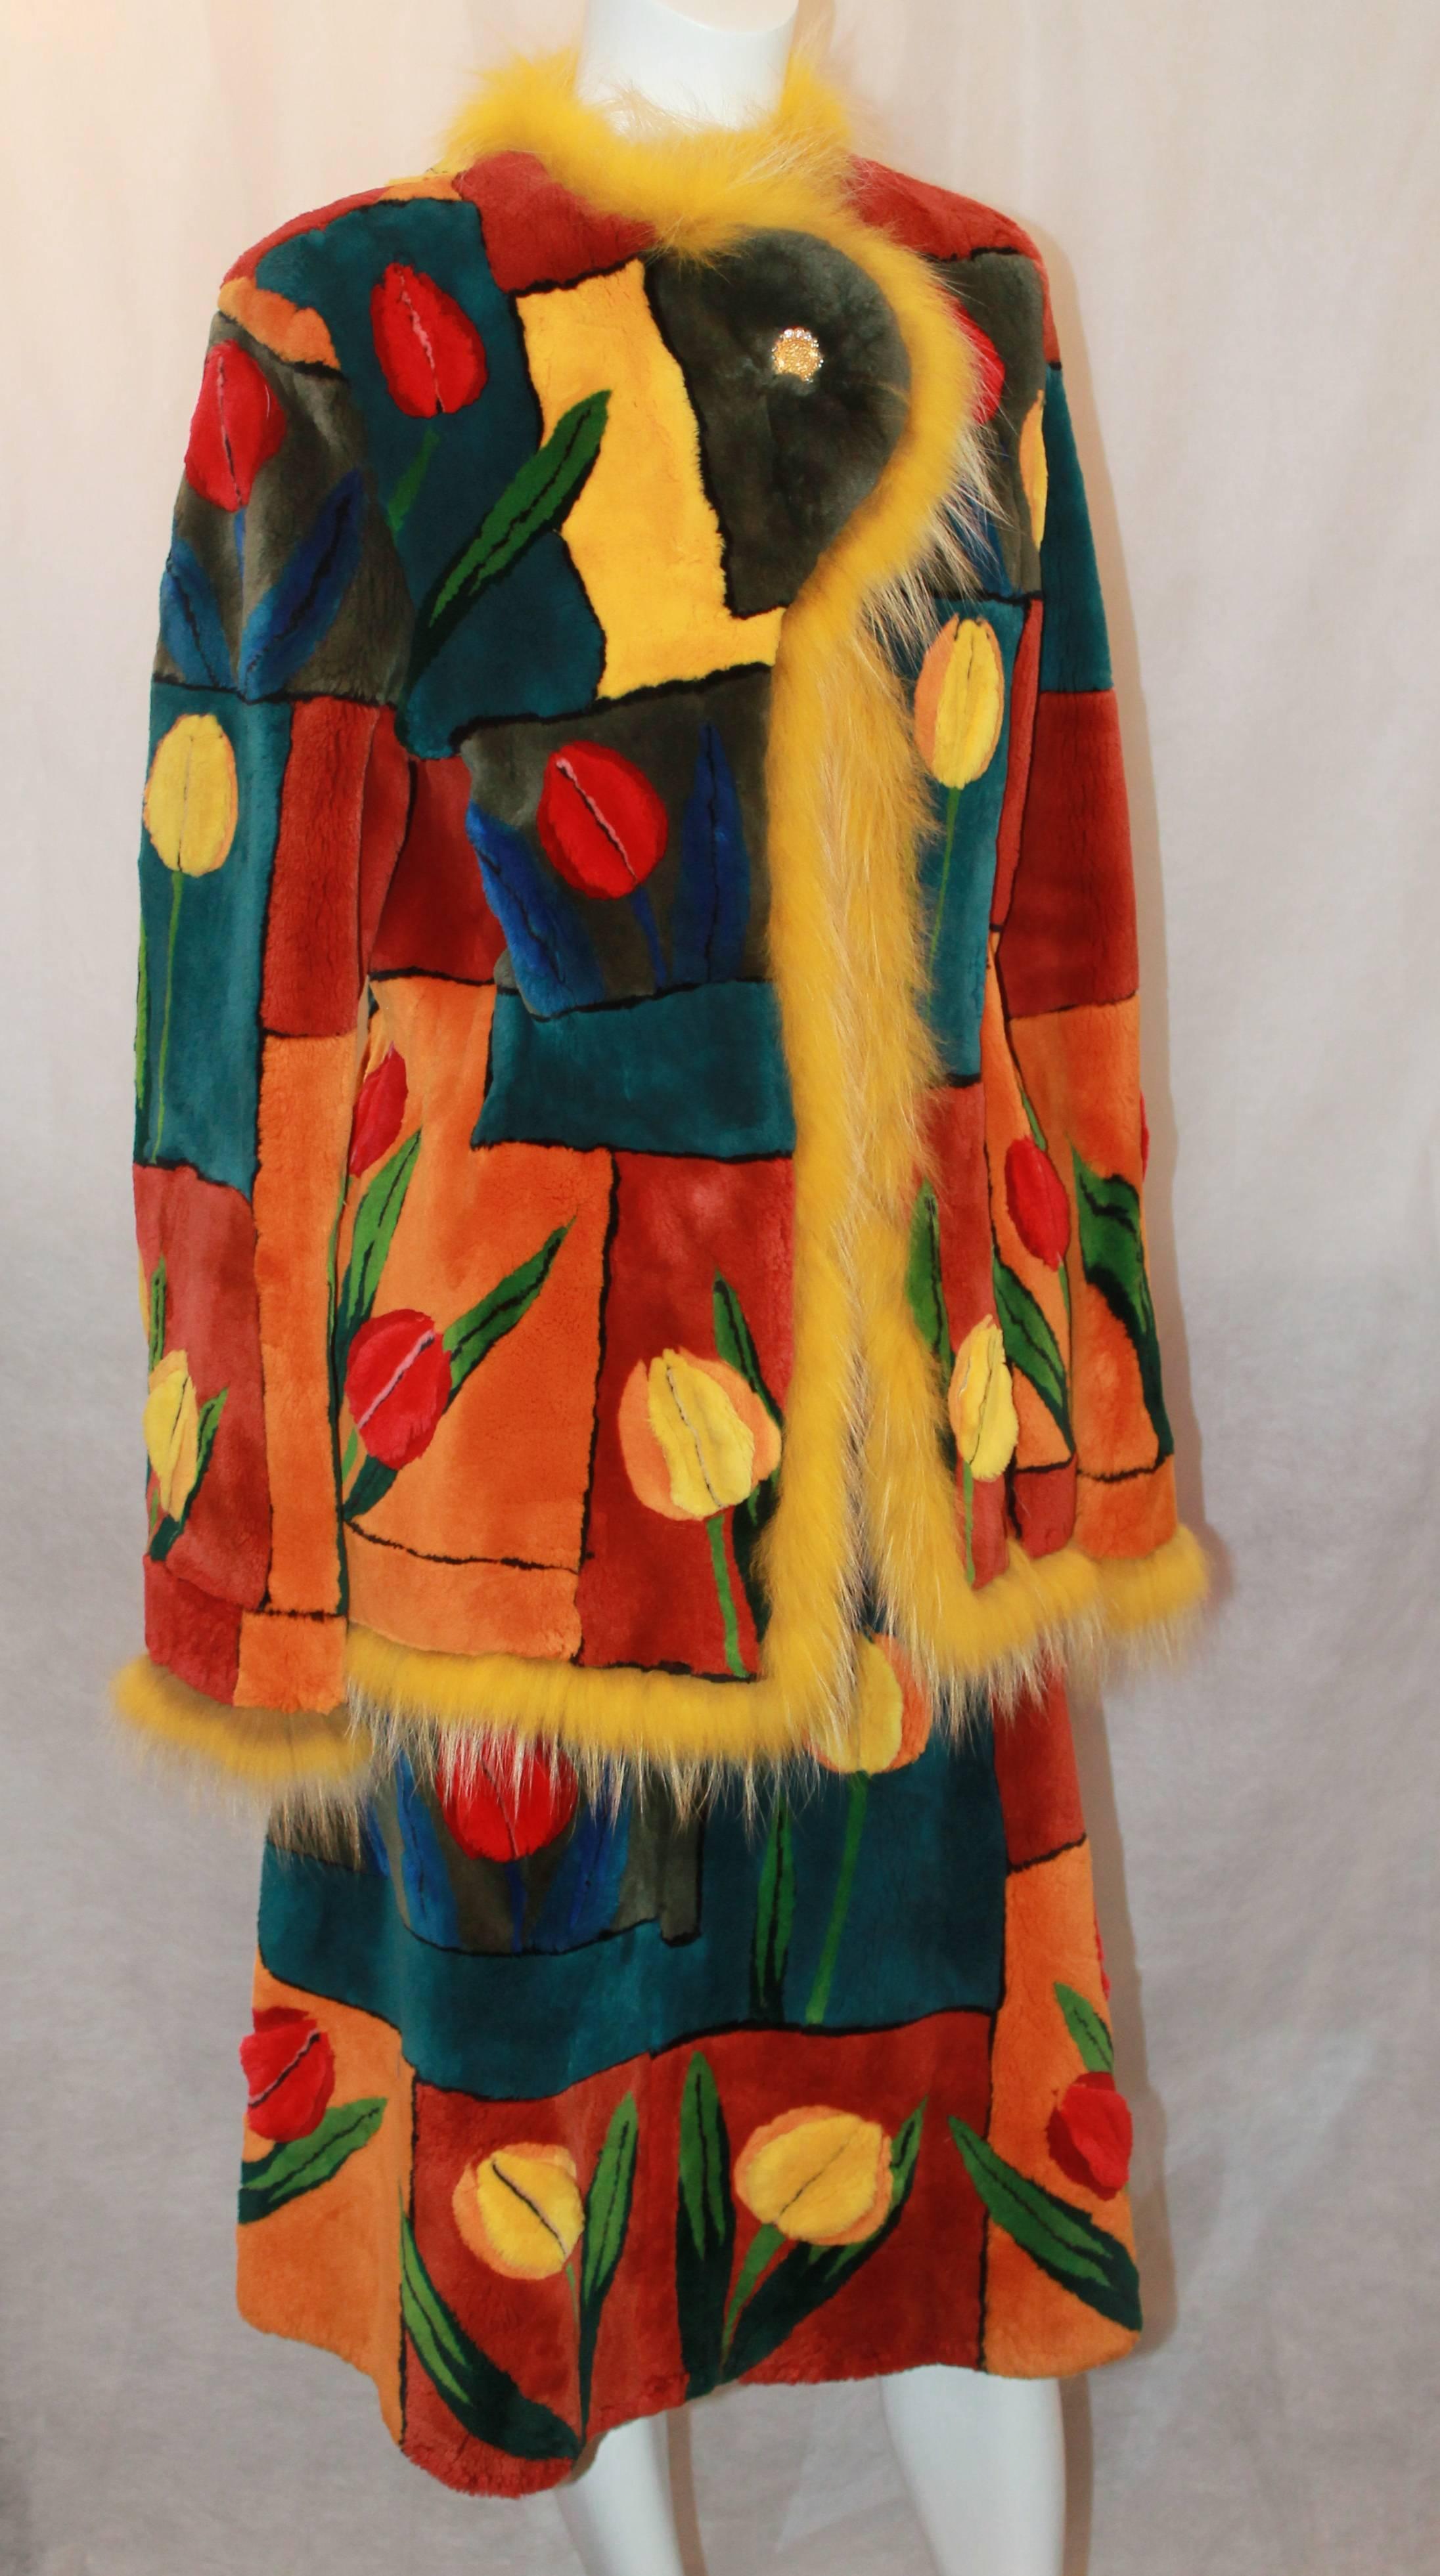 Zuki Floral Color Block Sheared Beaver Skirt Suit - Size 8  This one of a kind piece has beautiful red, orange, blue, green , teal and yellow patchwork/color block pattern w/ tulips. It has a yellow fur trim.  The jacket has a single top rhinestone